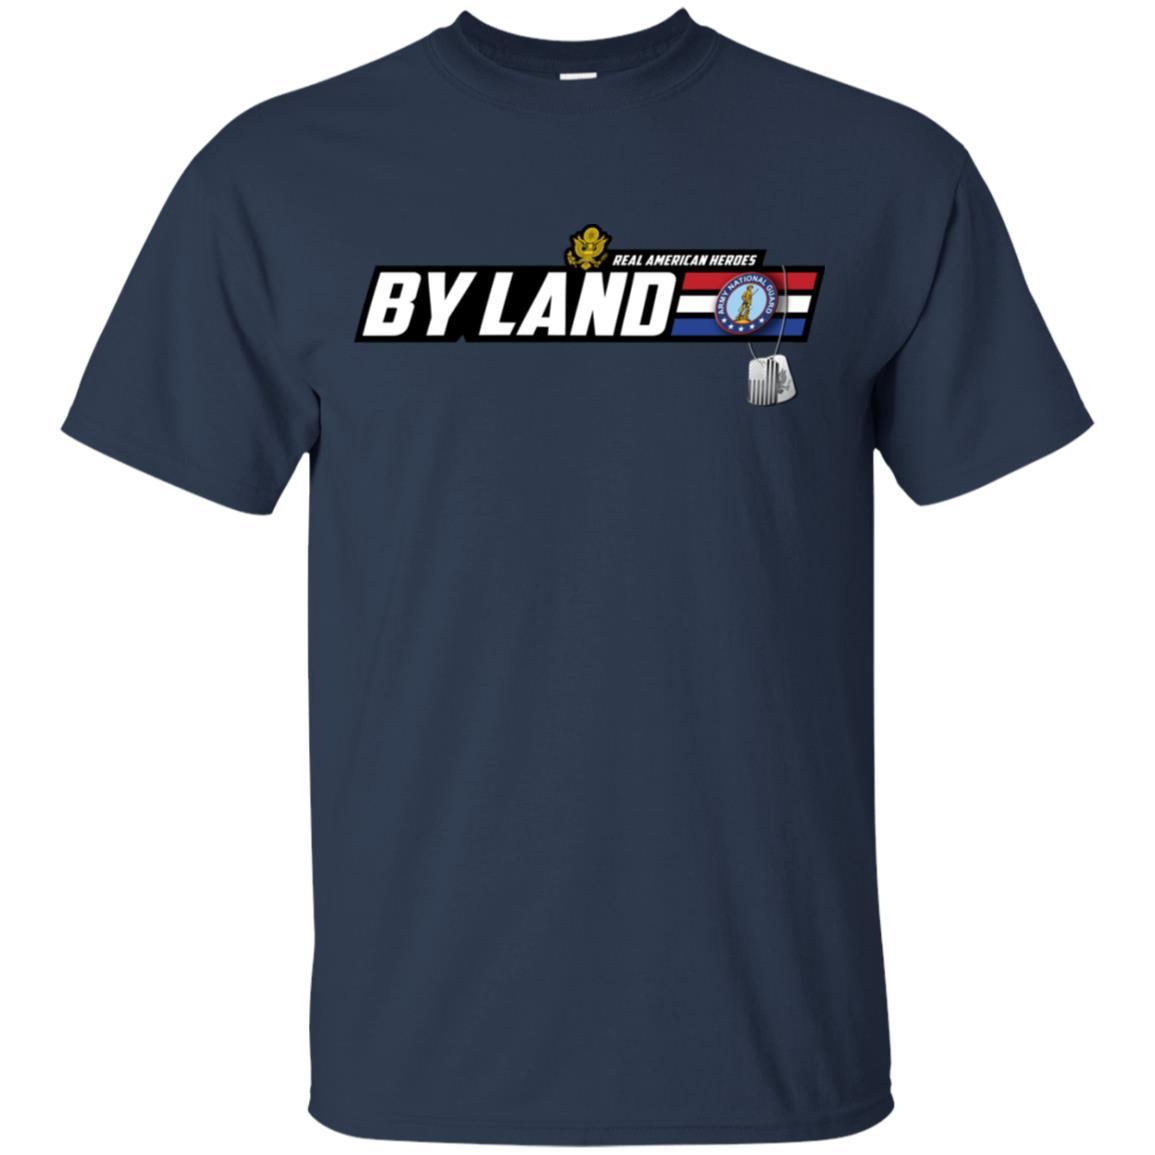 US Army T-Shirt "National Guard Real American Heroes By Land" On Front-TShirt-Army-Veterans Nation